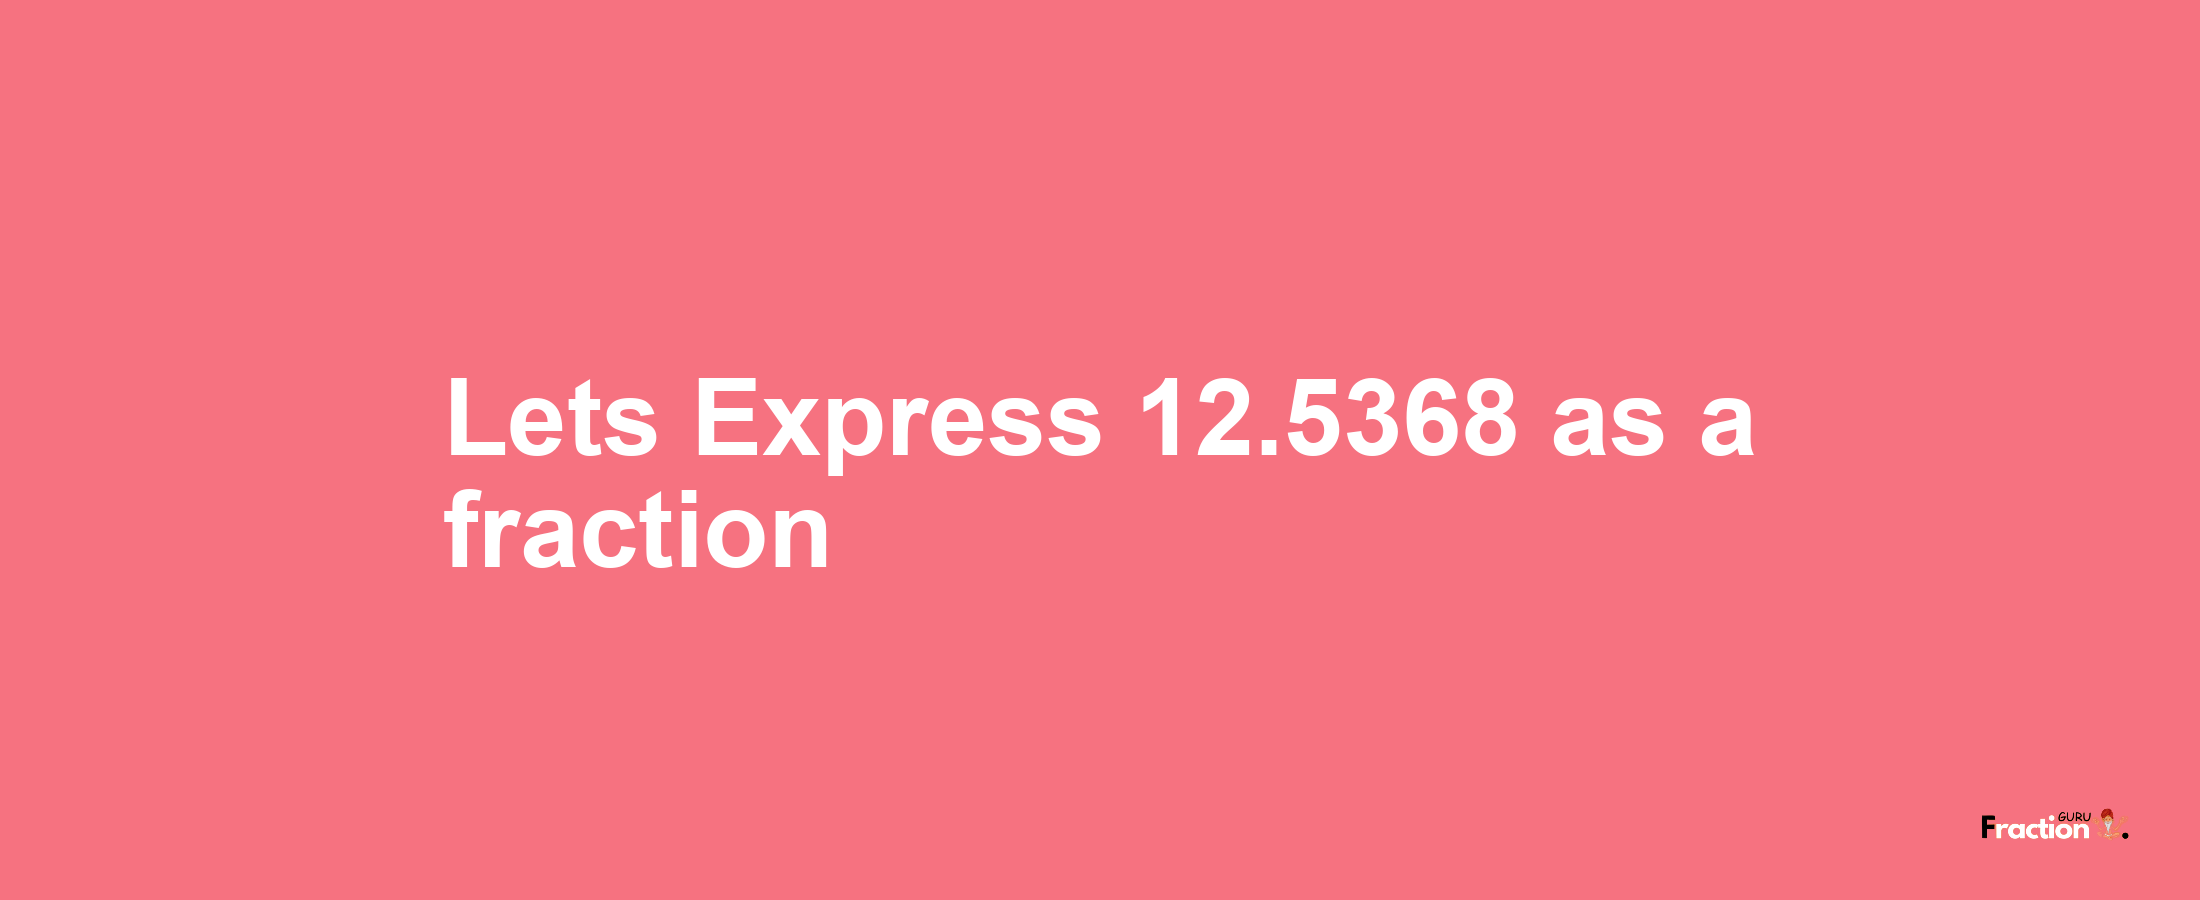 Lets Express 12.5368 as afraction